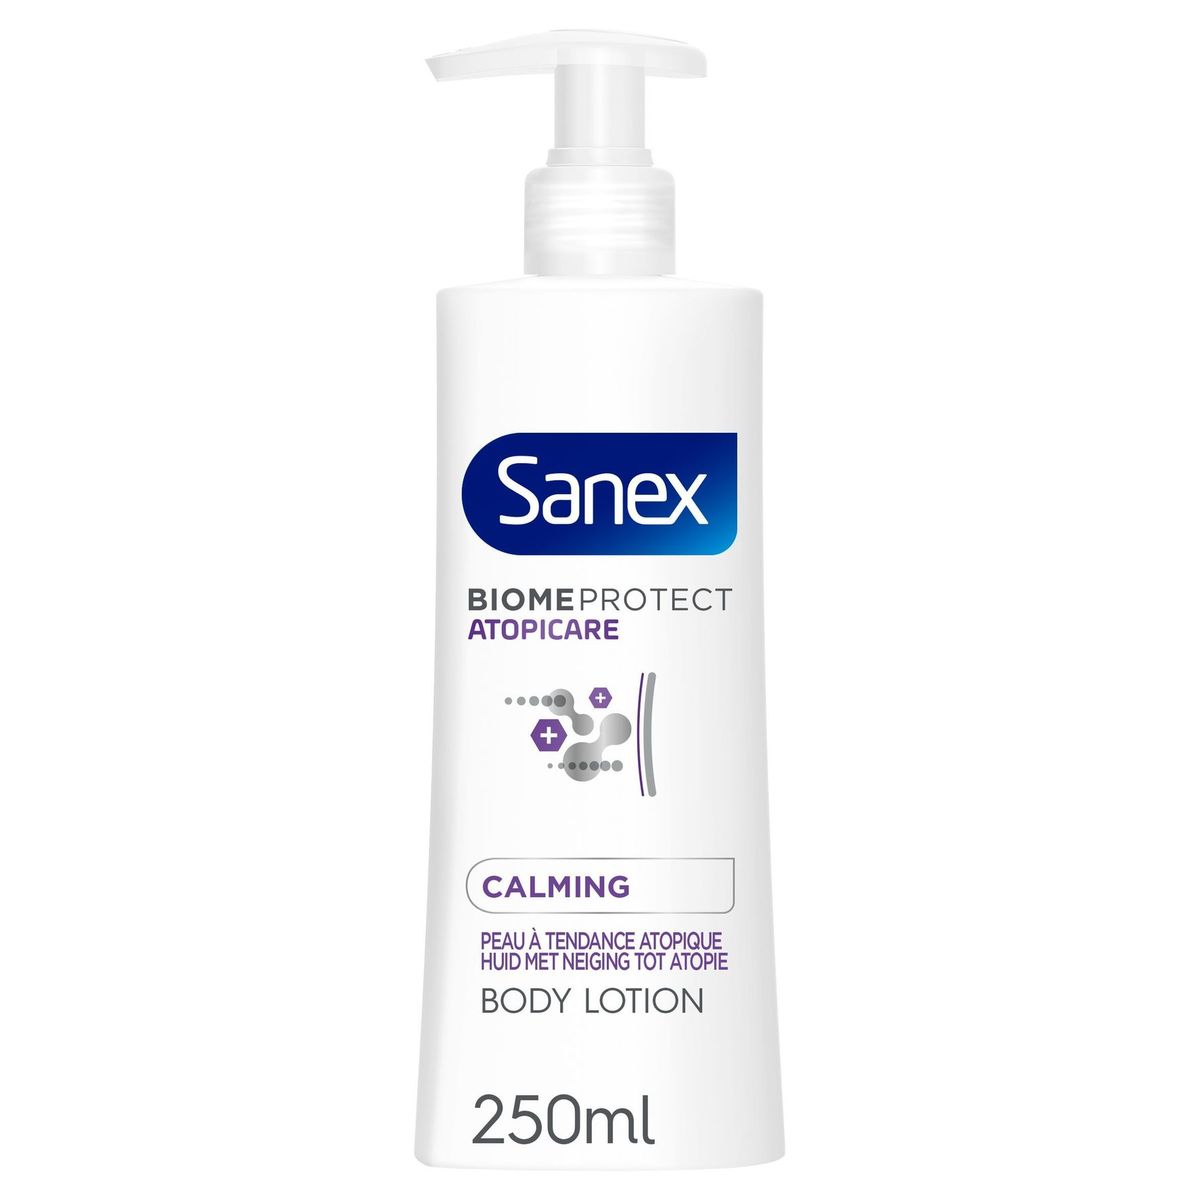 Sanex BiomeProtect Atopicare Calming Body Lotion - 250ml